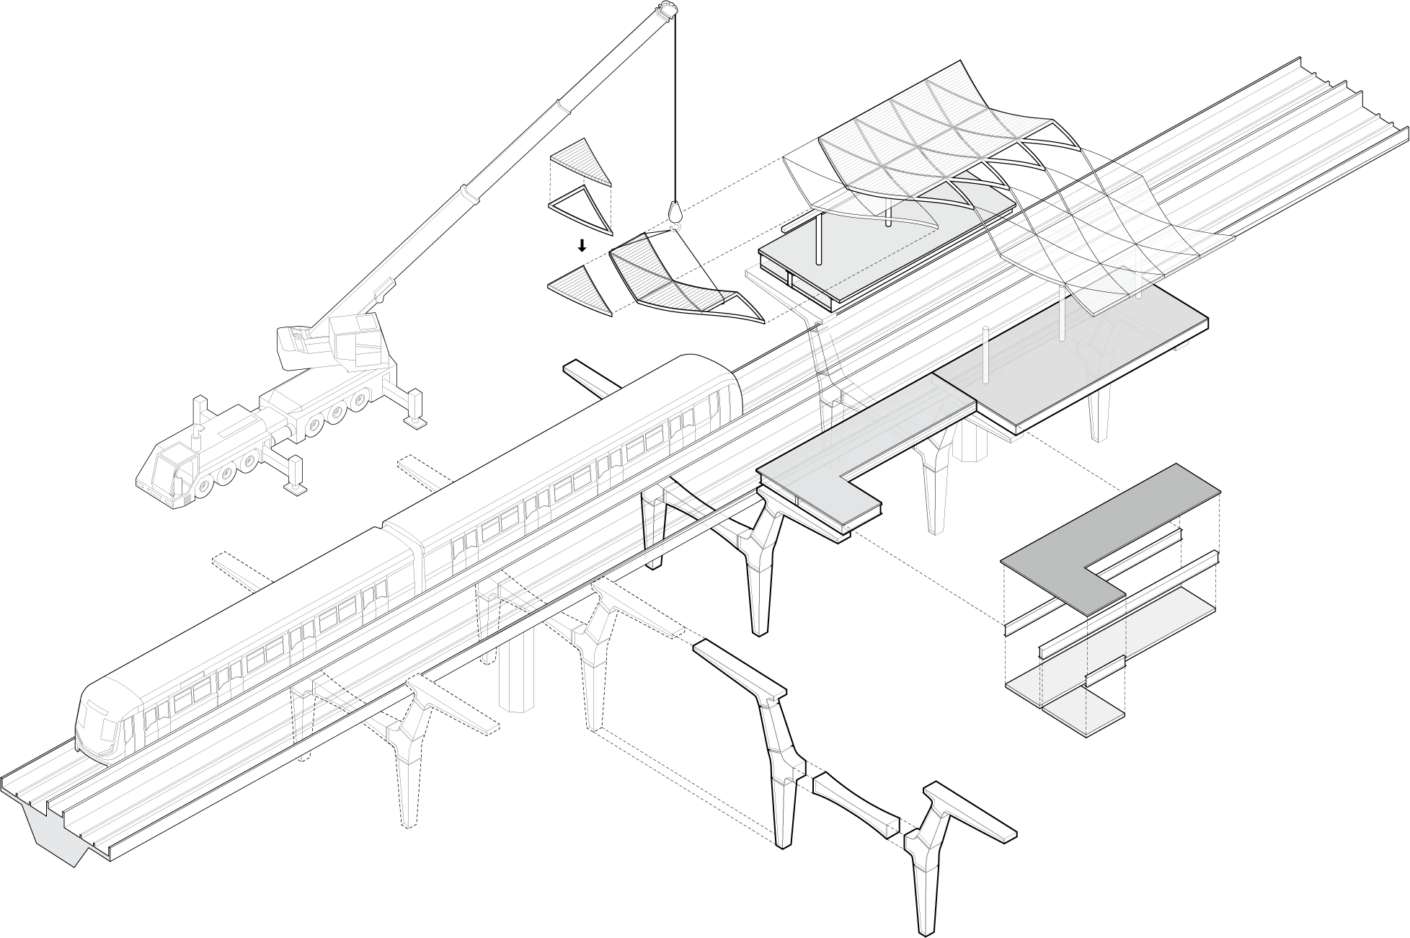 Diagram showing prototype station assembly around active guideway.